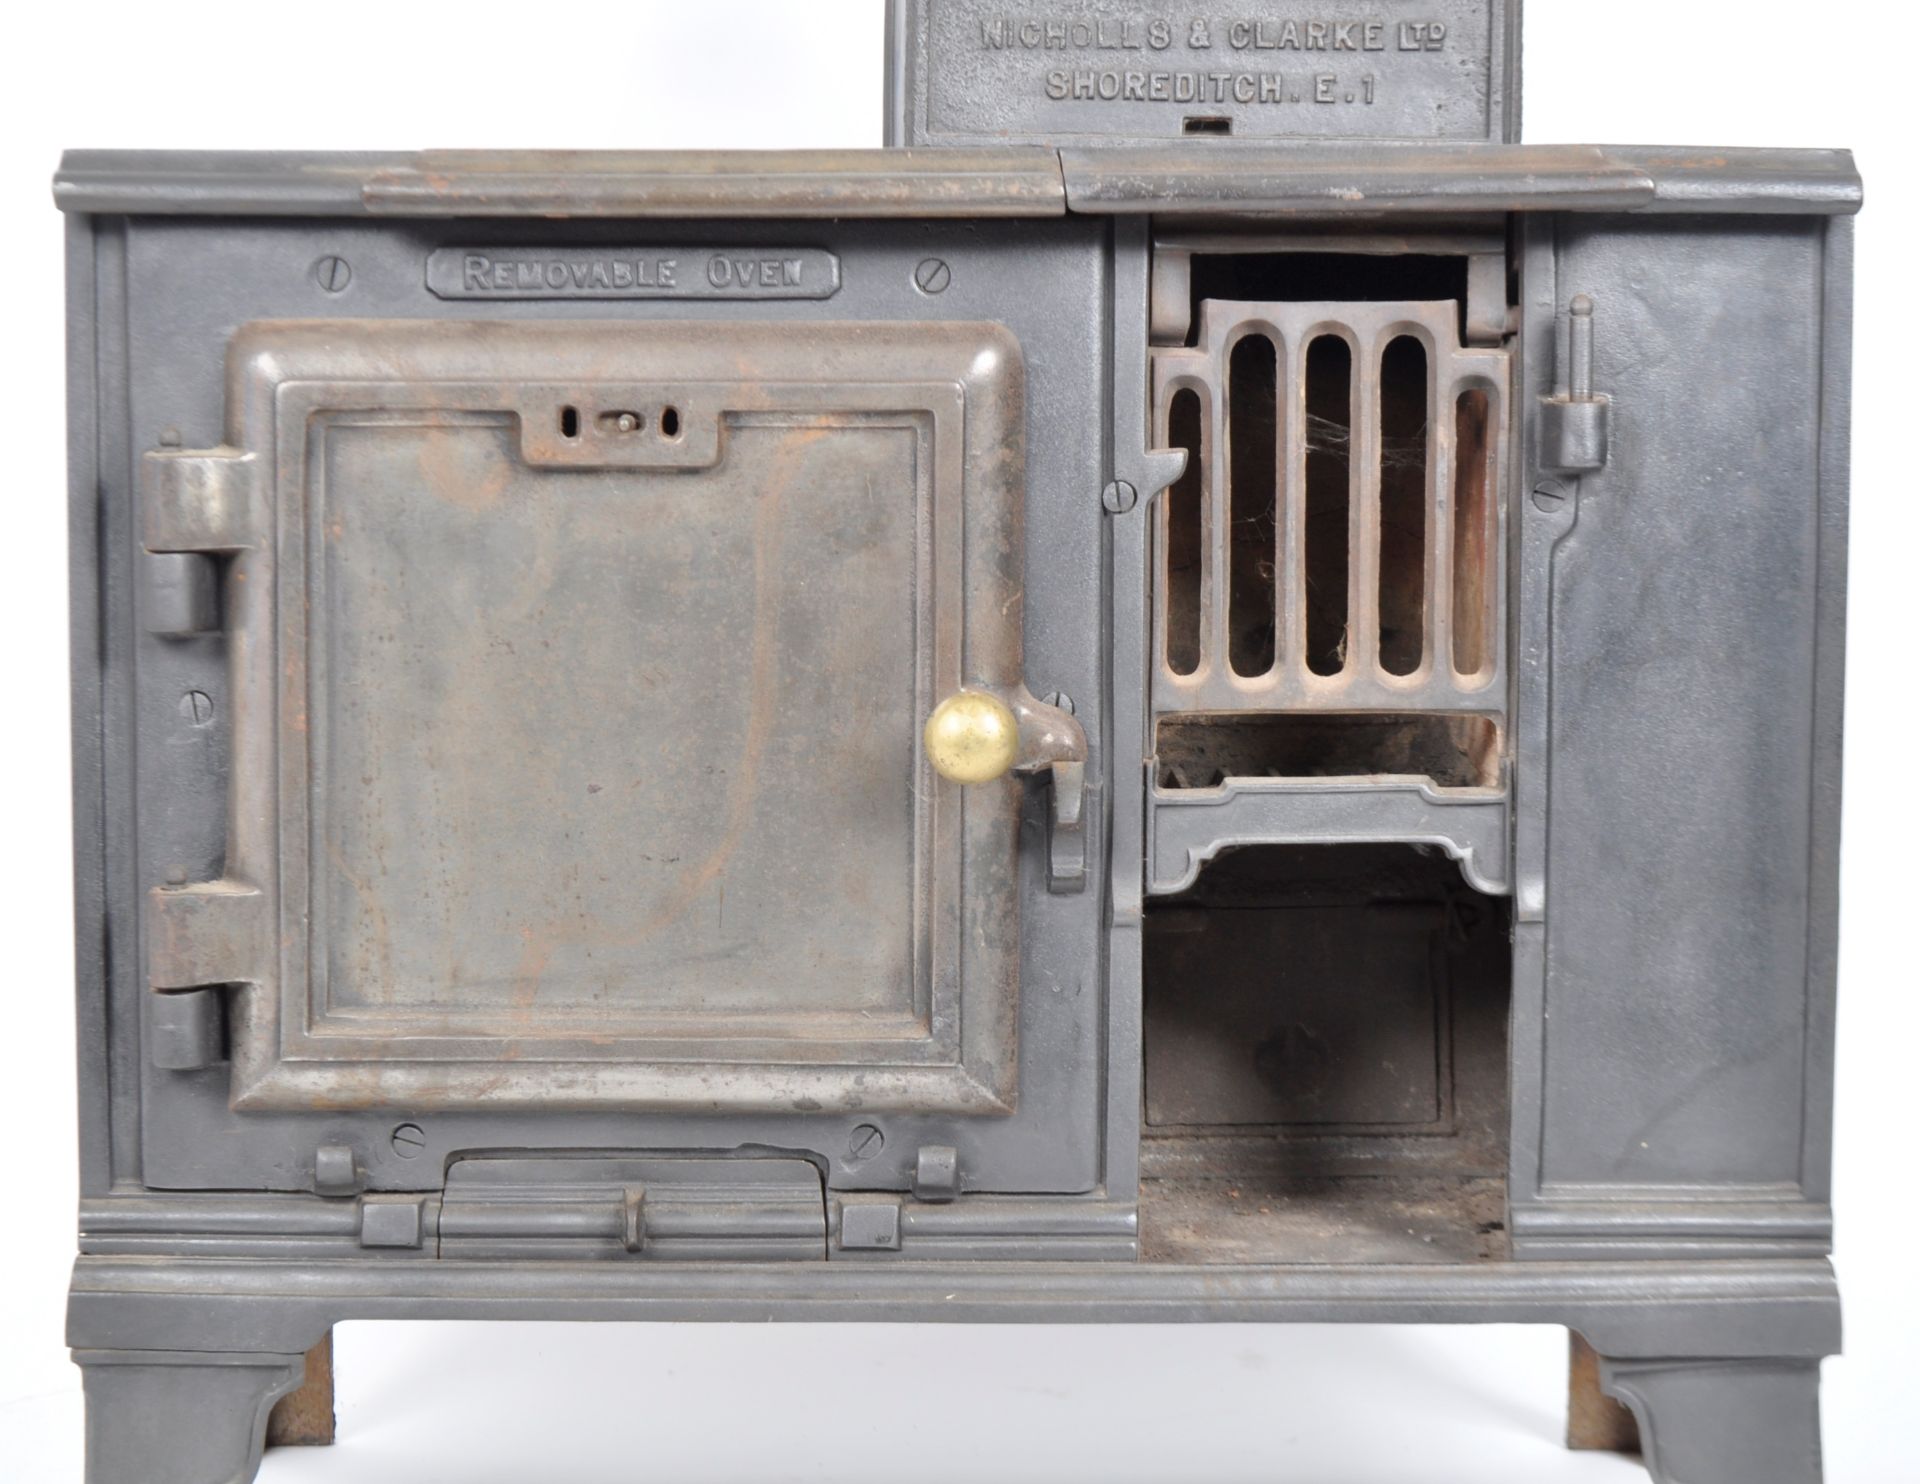 19TH CENTURY VICTORIAN CAST IRON OVEN STOVE - Image 2 of 6